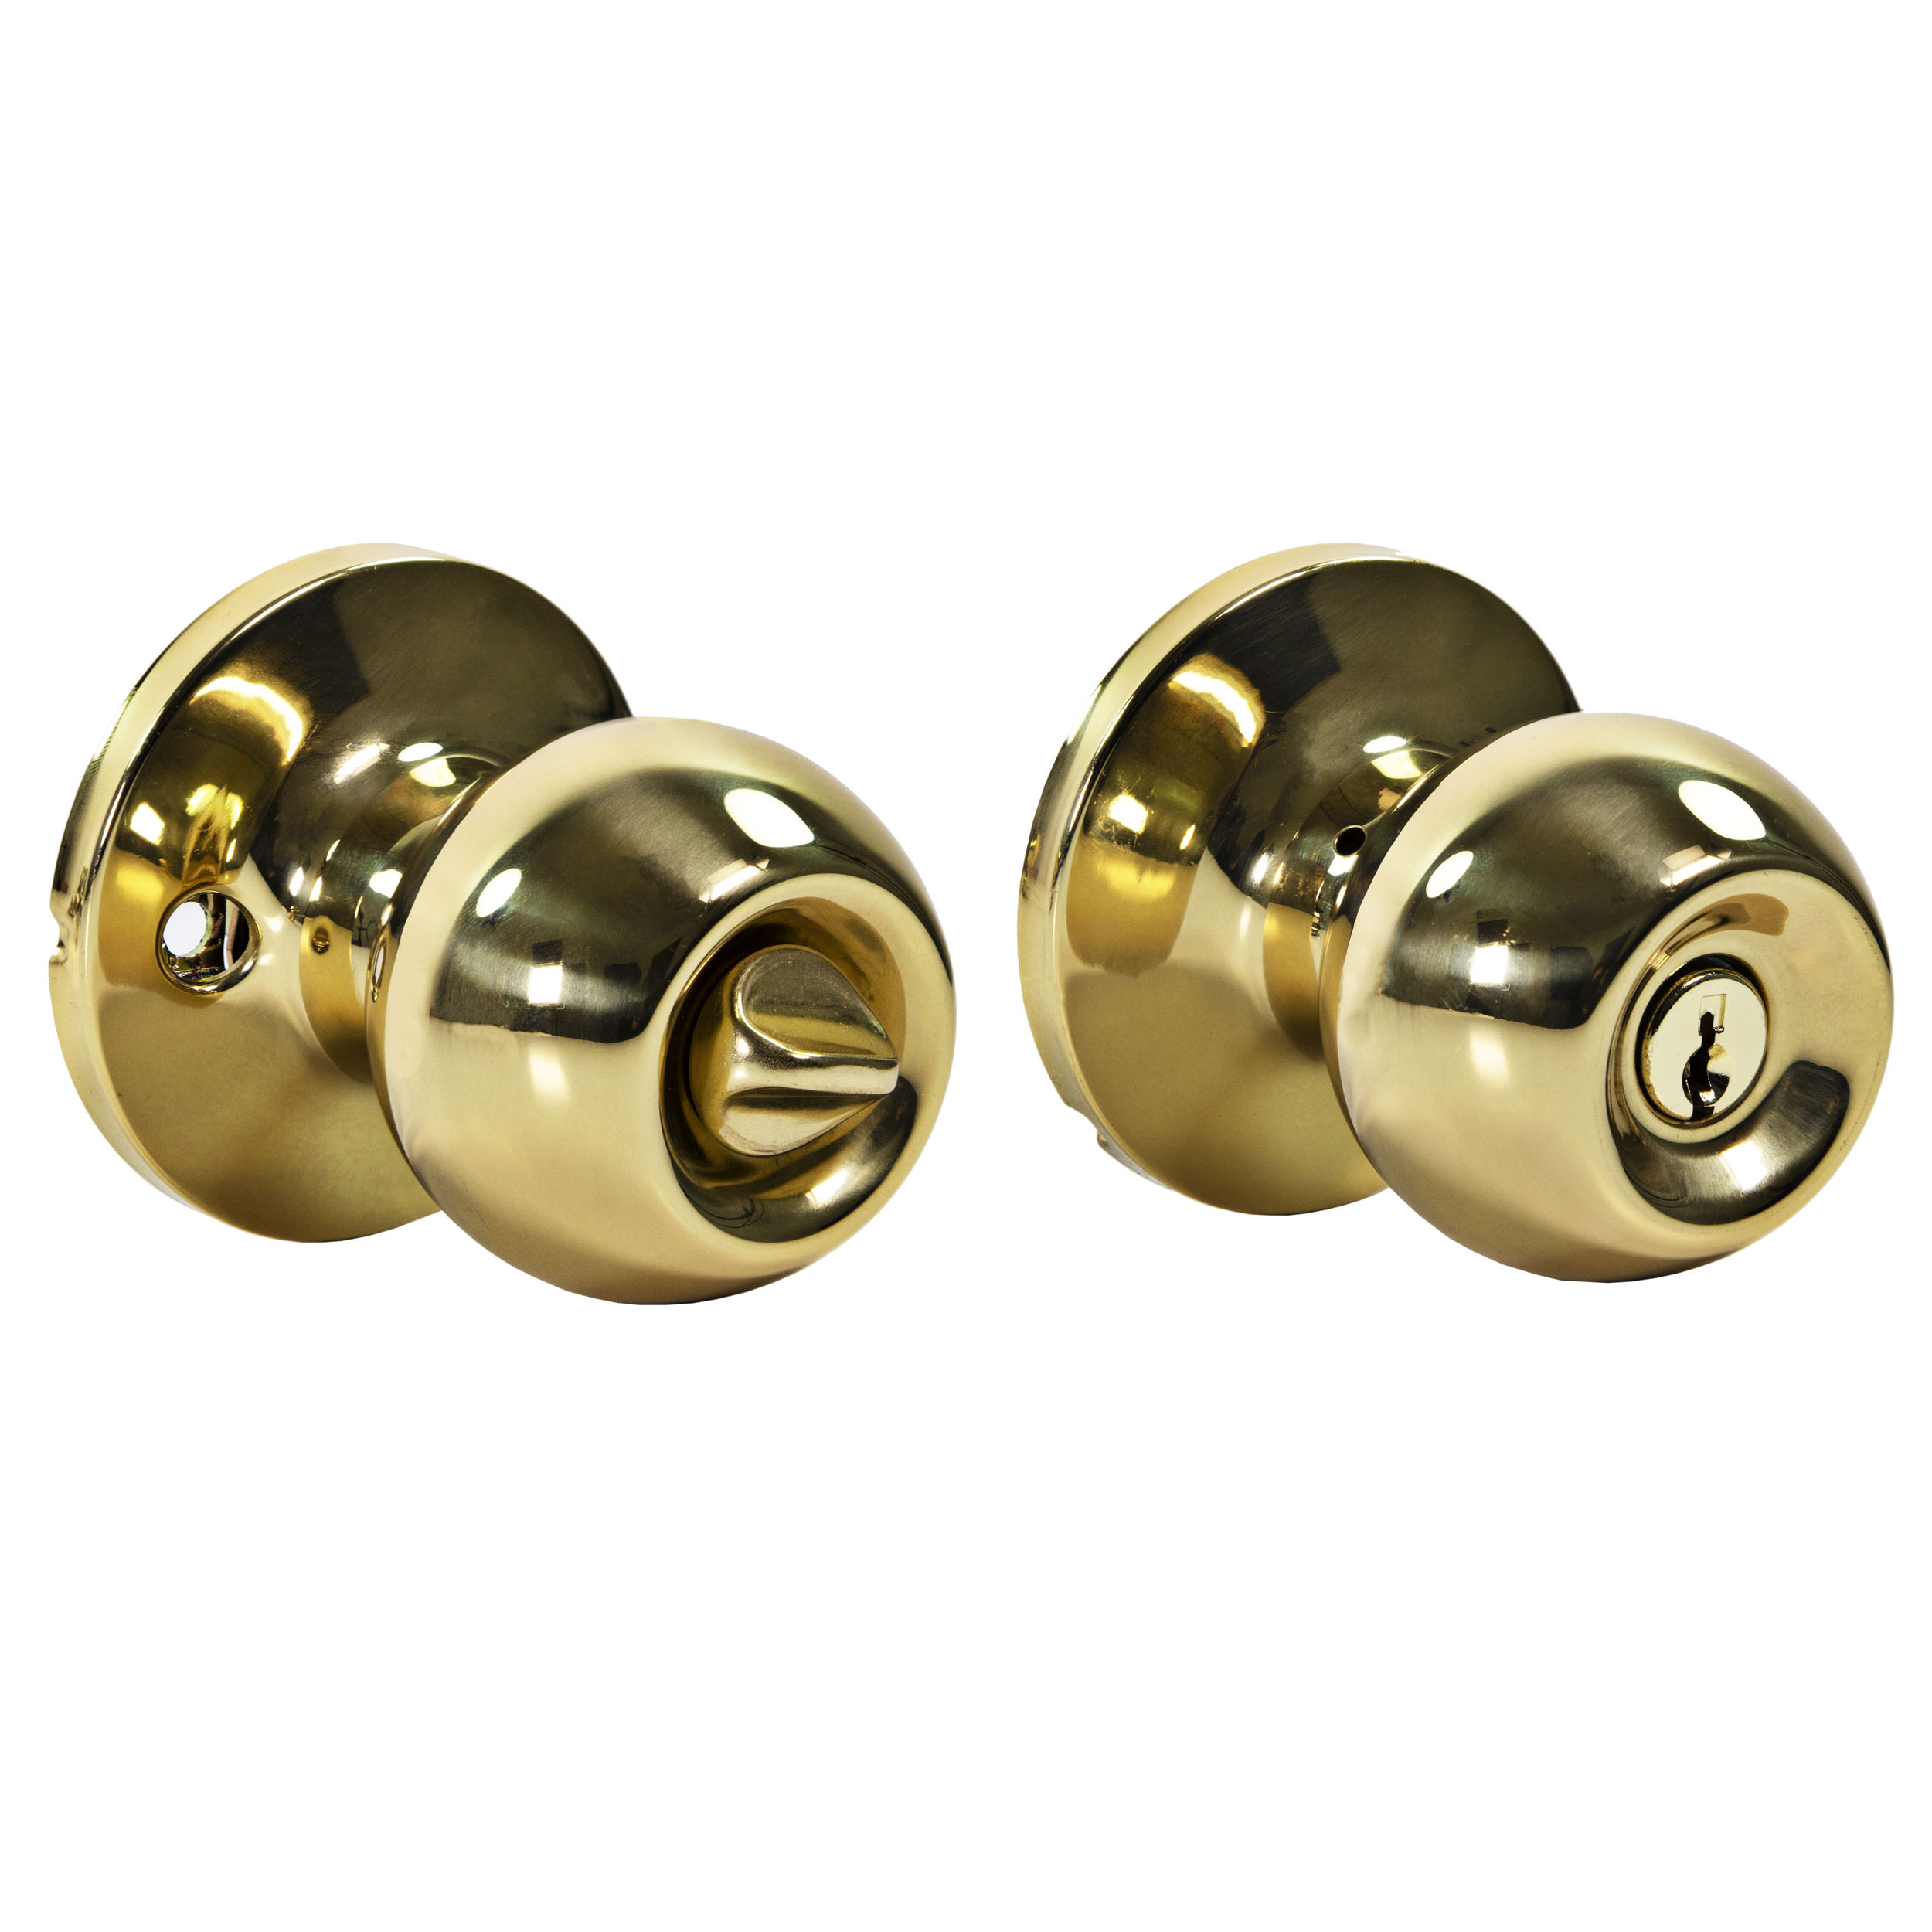 Ultra Security Chestnut Hill Keyed Entry Ball Door Knob - Security Keyed Entry Lockset, KW1 Keyed Entry, Fits 1-3/8" To 1-3/4" Thick Door (Polished Brass Finish, 1 Pack) - image 1 of 10